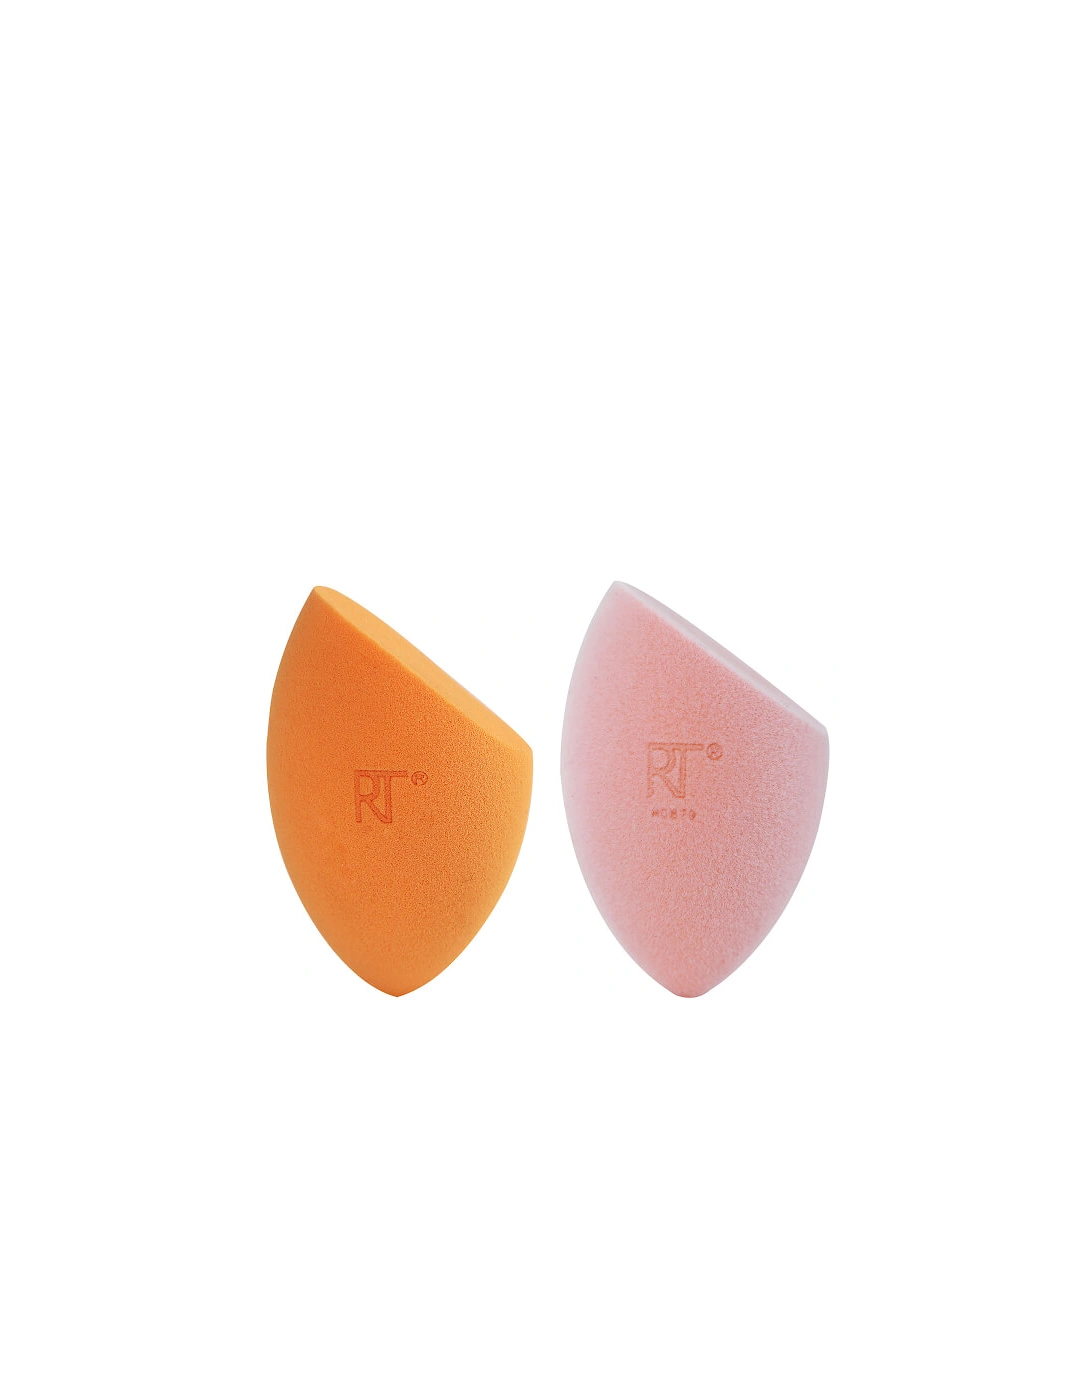 Miracle Complexion Sponge and Miracle Powder Sponge (Worth £13.00), 2 of 1